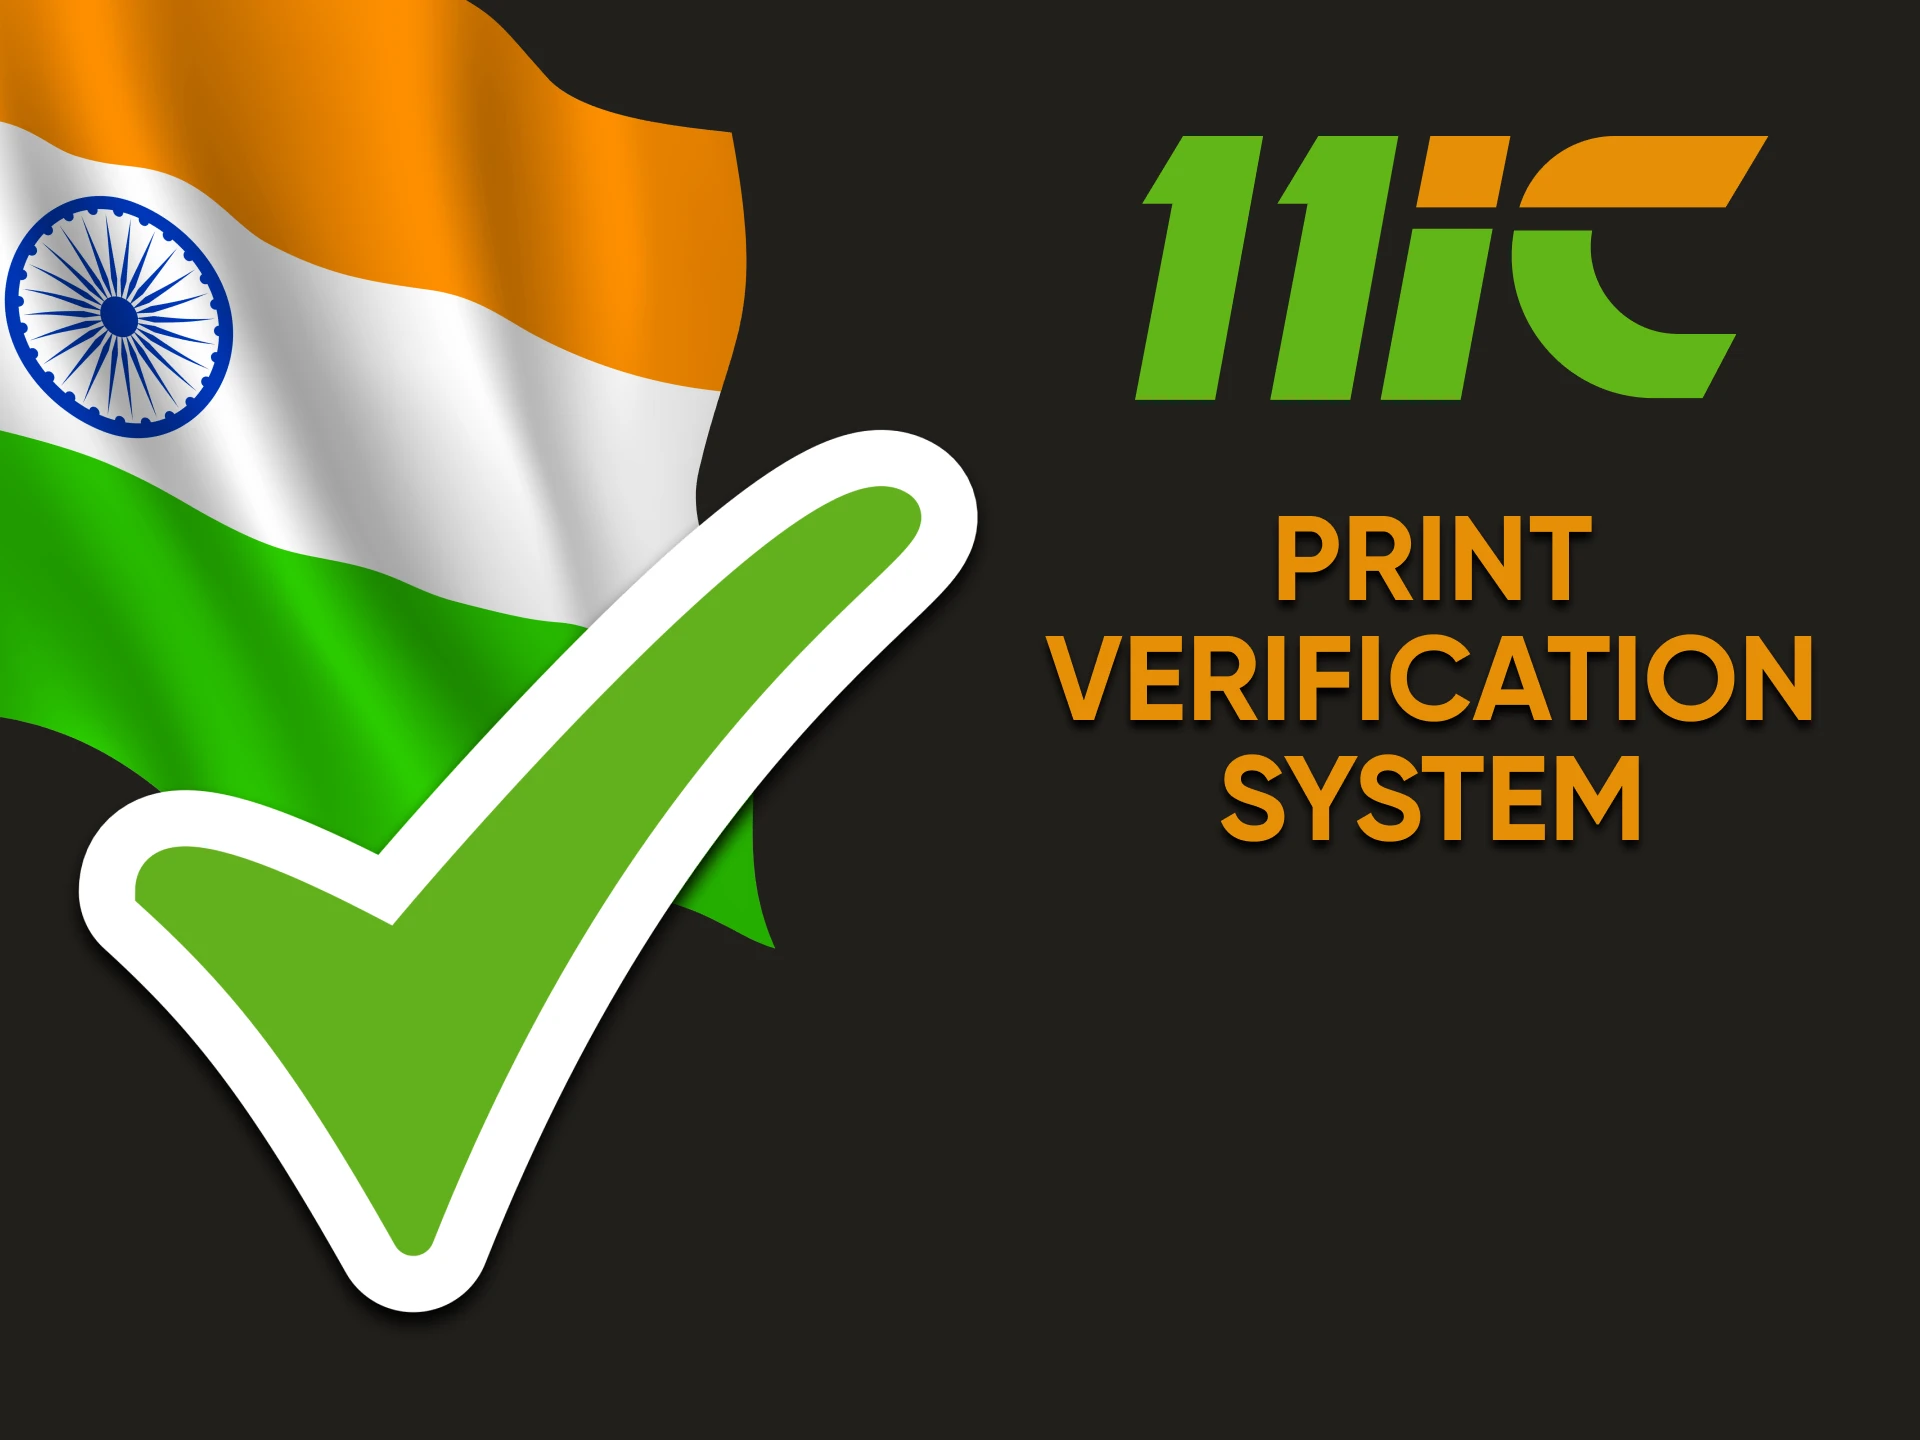 We will tell you how the printing system is checked on 11ic.